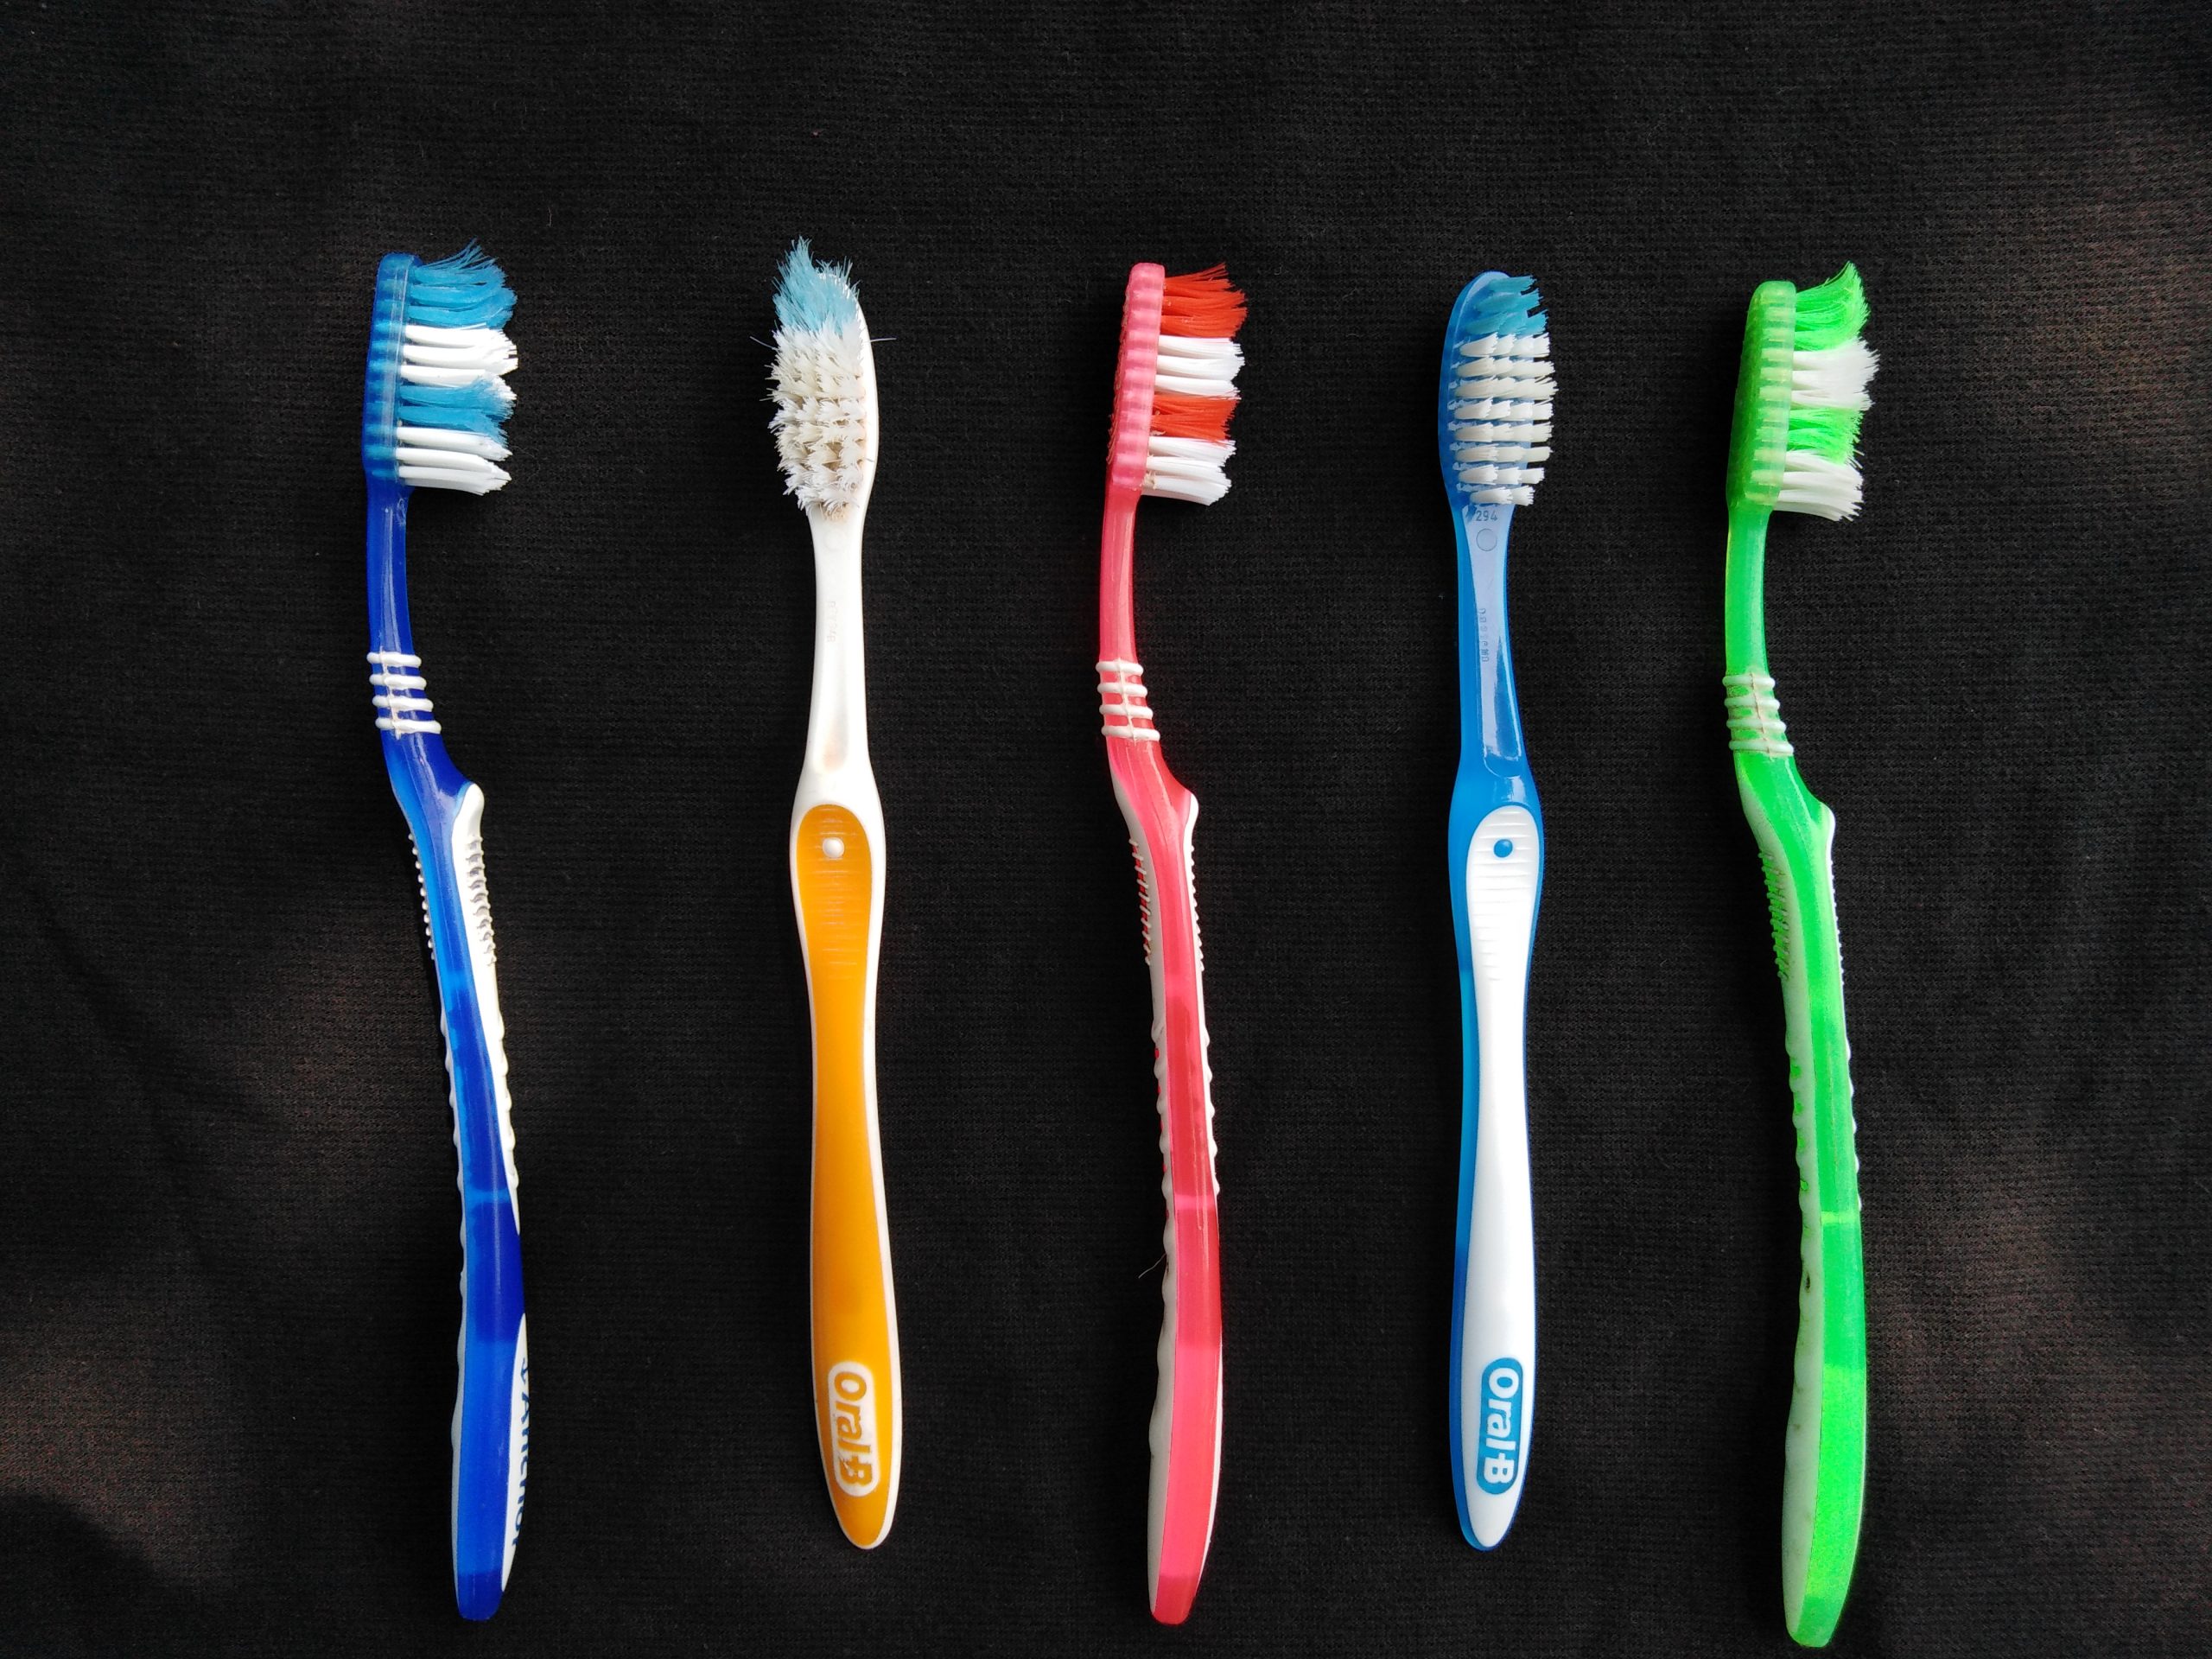 Multicolor toothbrushes